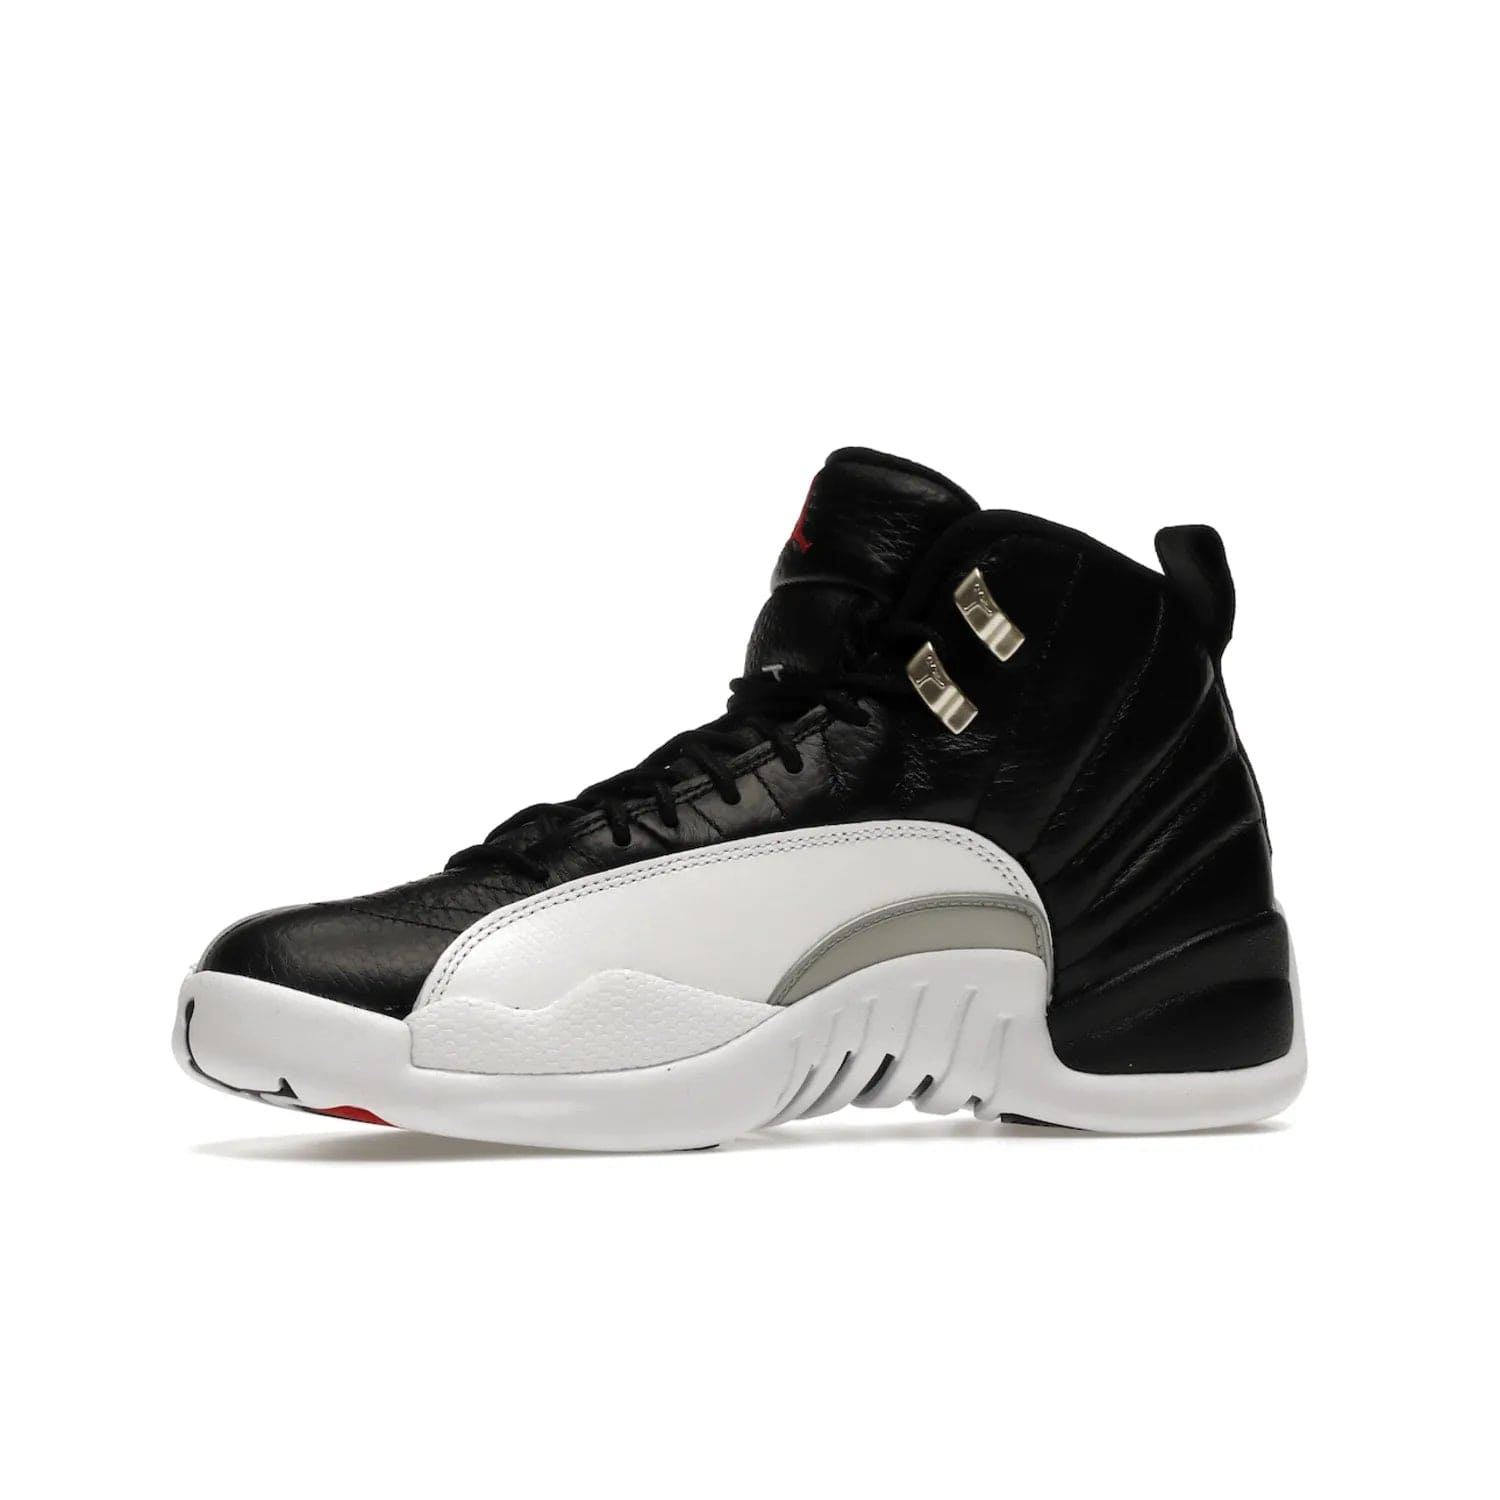 Jordan 12 Retro Playoffs (2022) - Image 17 - Only at www.BallersClubKickz.com - Retro Air Jordan 12 Playoffs. Celebrate 25 years with MJ's iconic shoe. Black tumbled leather upper, white sole with carbon fiber detailing and Jumpman embroidery. Must-have for any Jordan shoe fan. Releases March 2022.